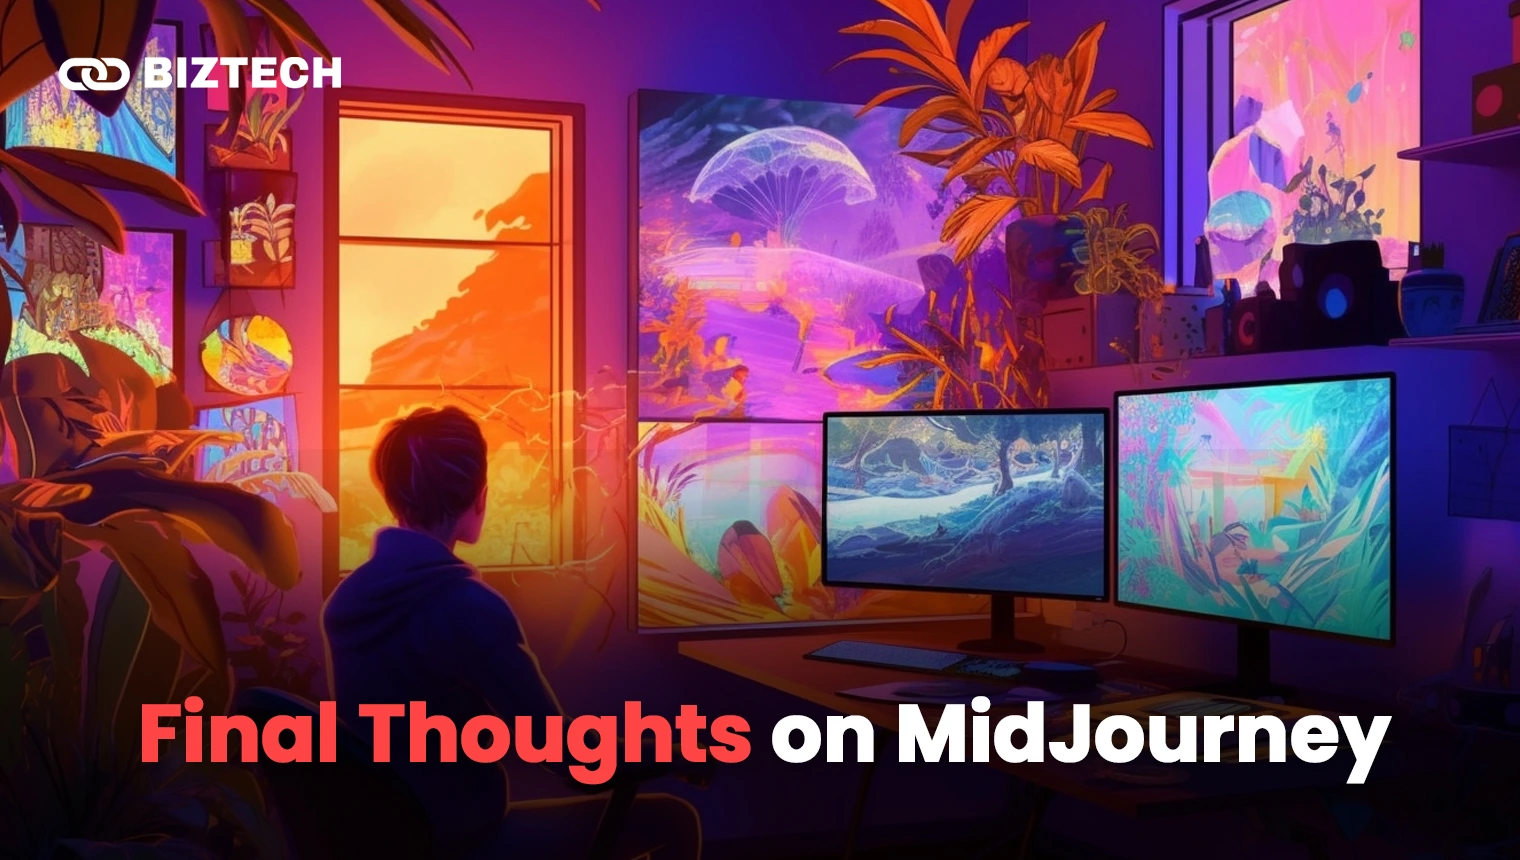 Final Thoughts on MidJourney